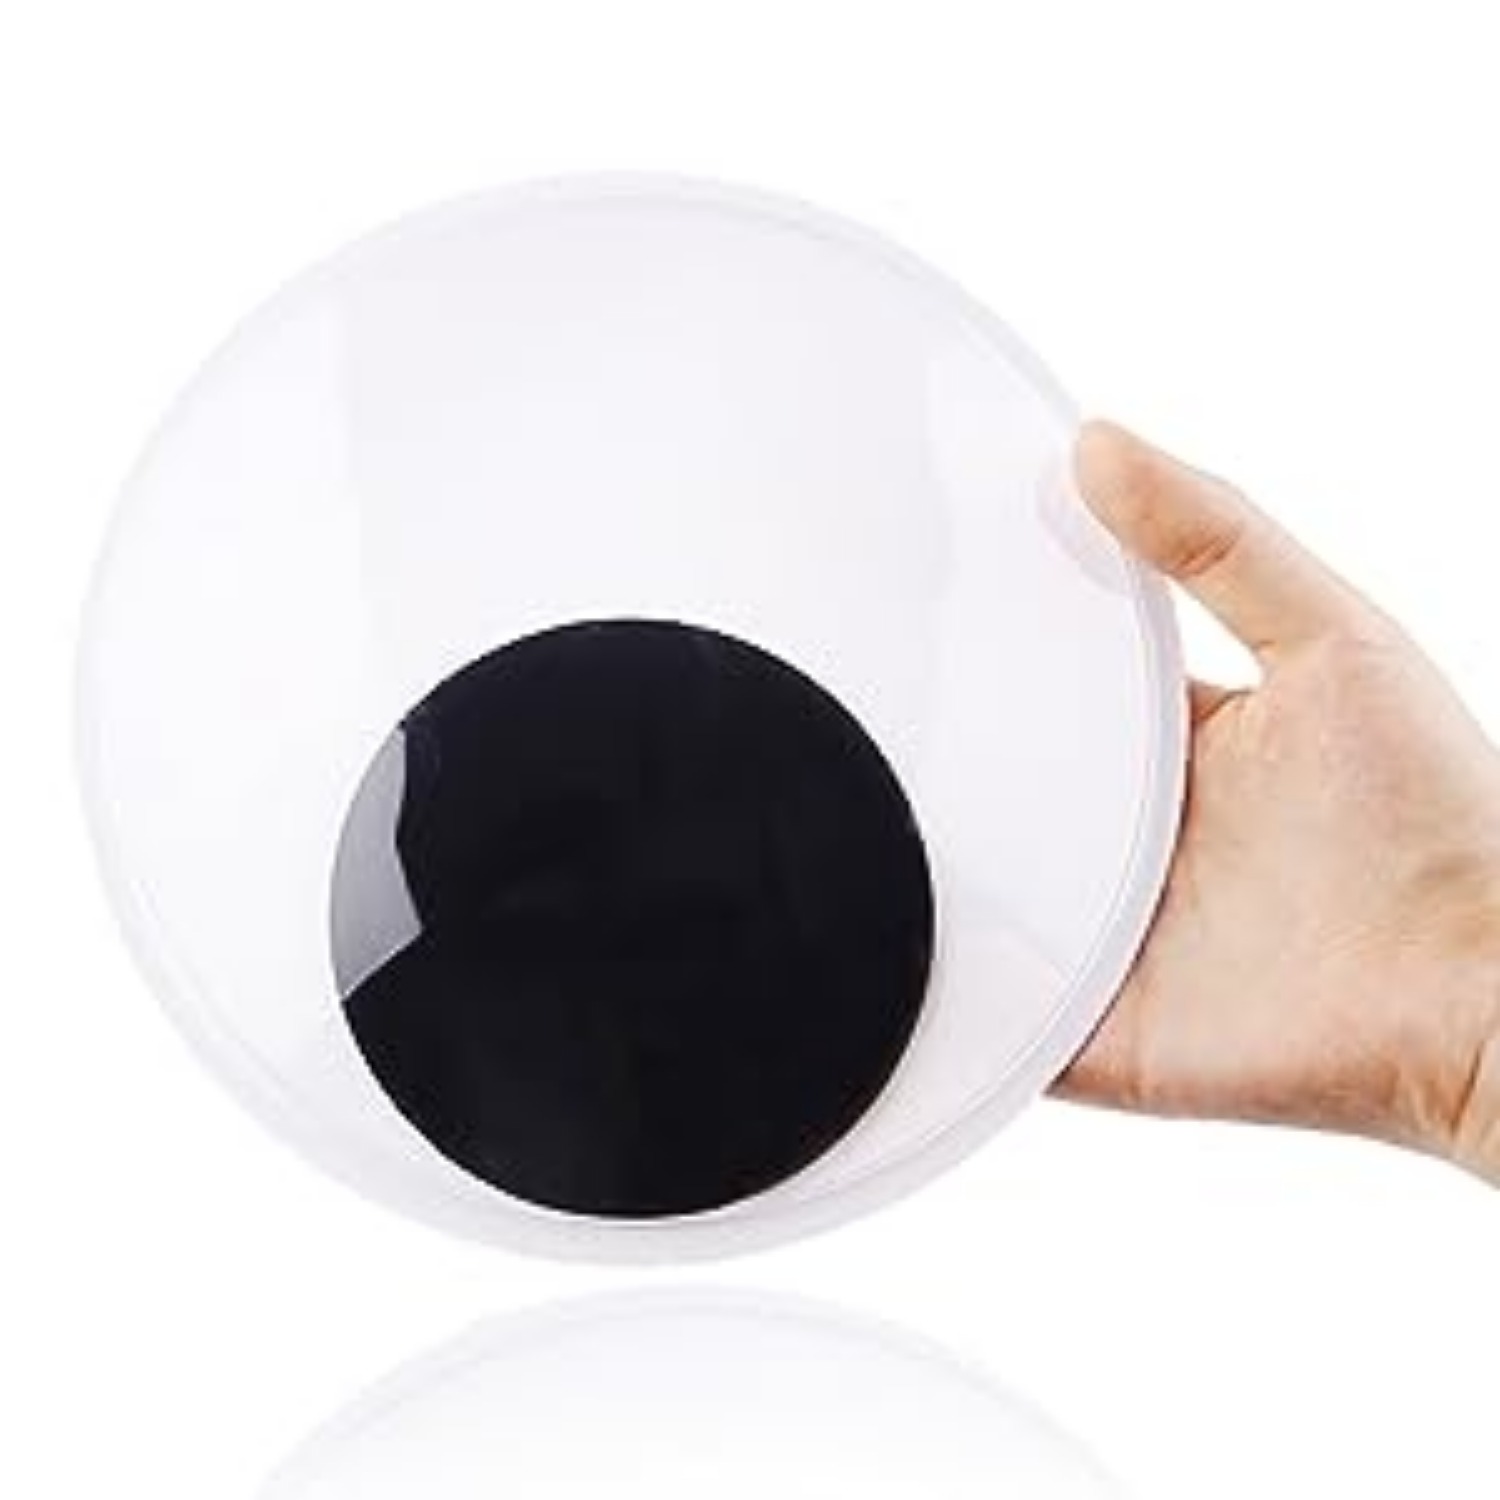 Bastex 3 inch Giant Googly Wiggle Eyes - 6 Pack. Includes Self Adhesive on  Backs. Big Wiggly Eyes for Decorations, Arts & Crafts